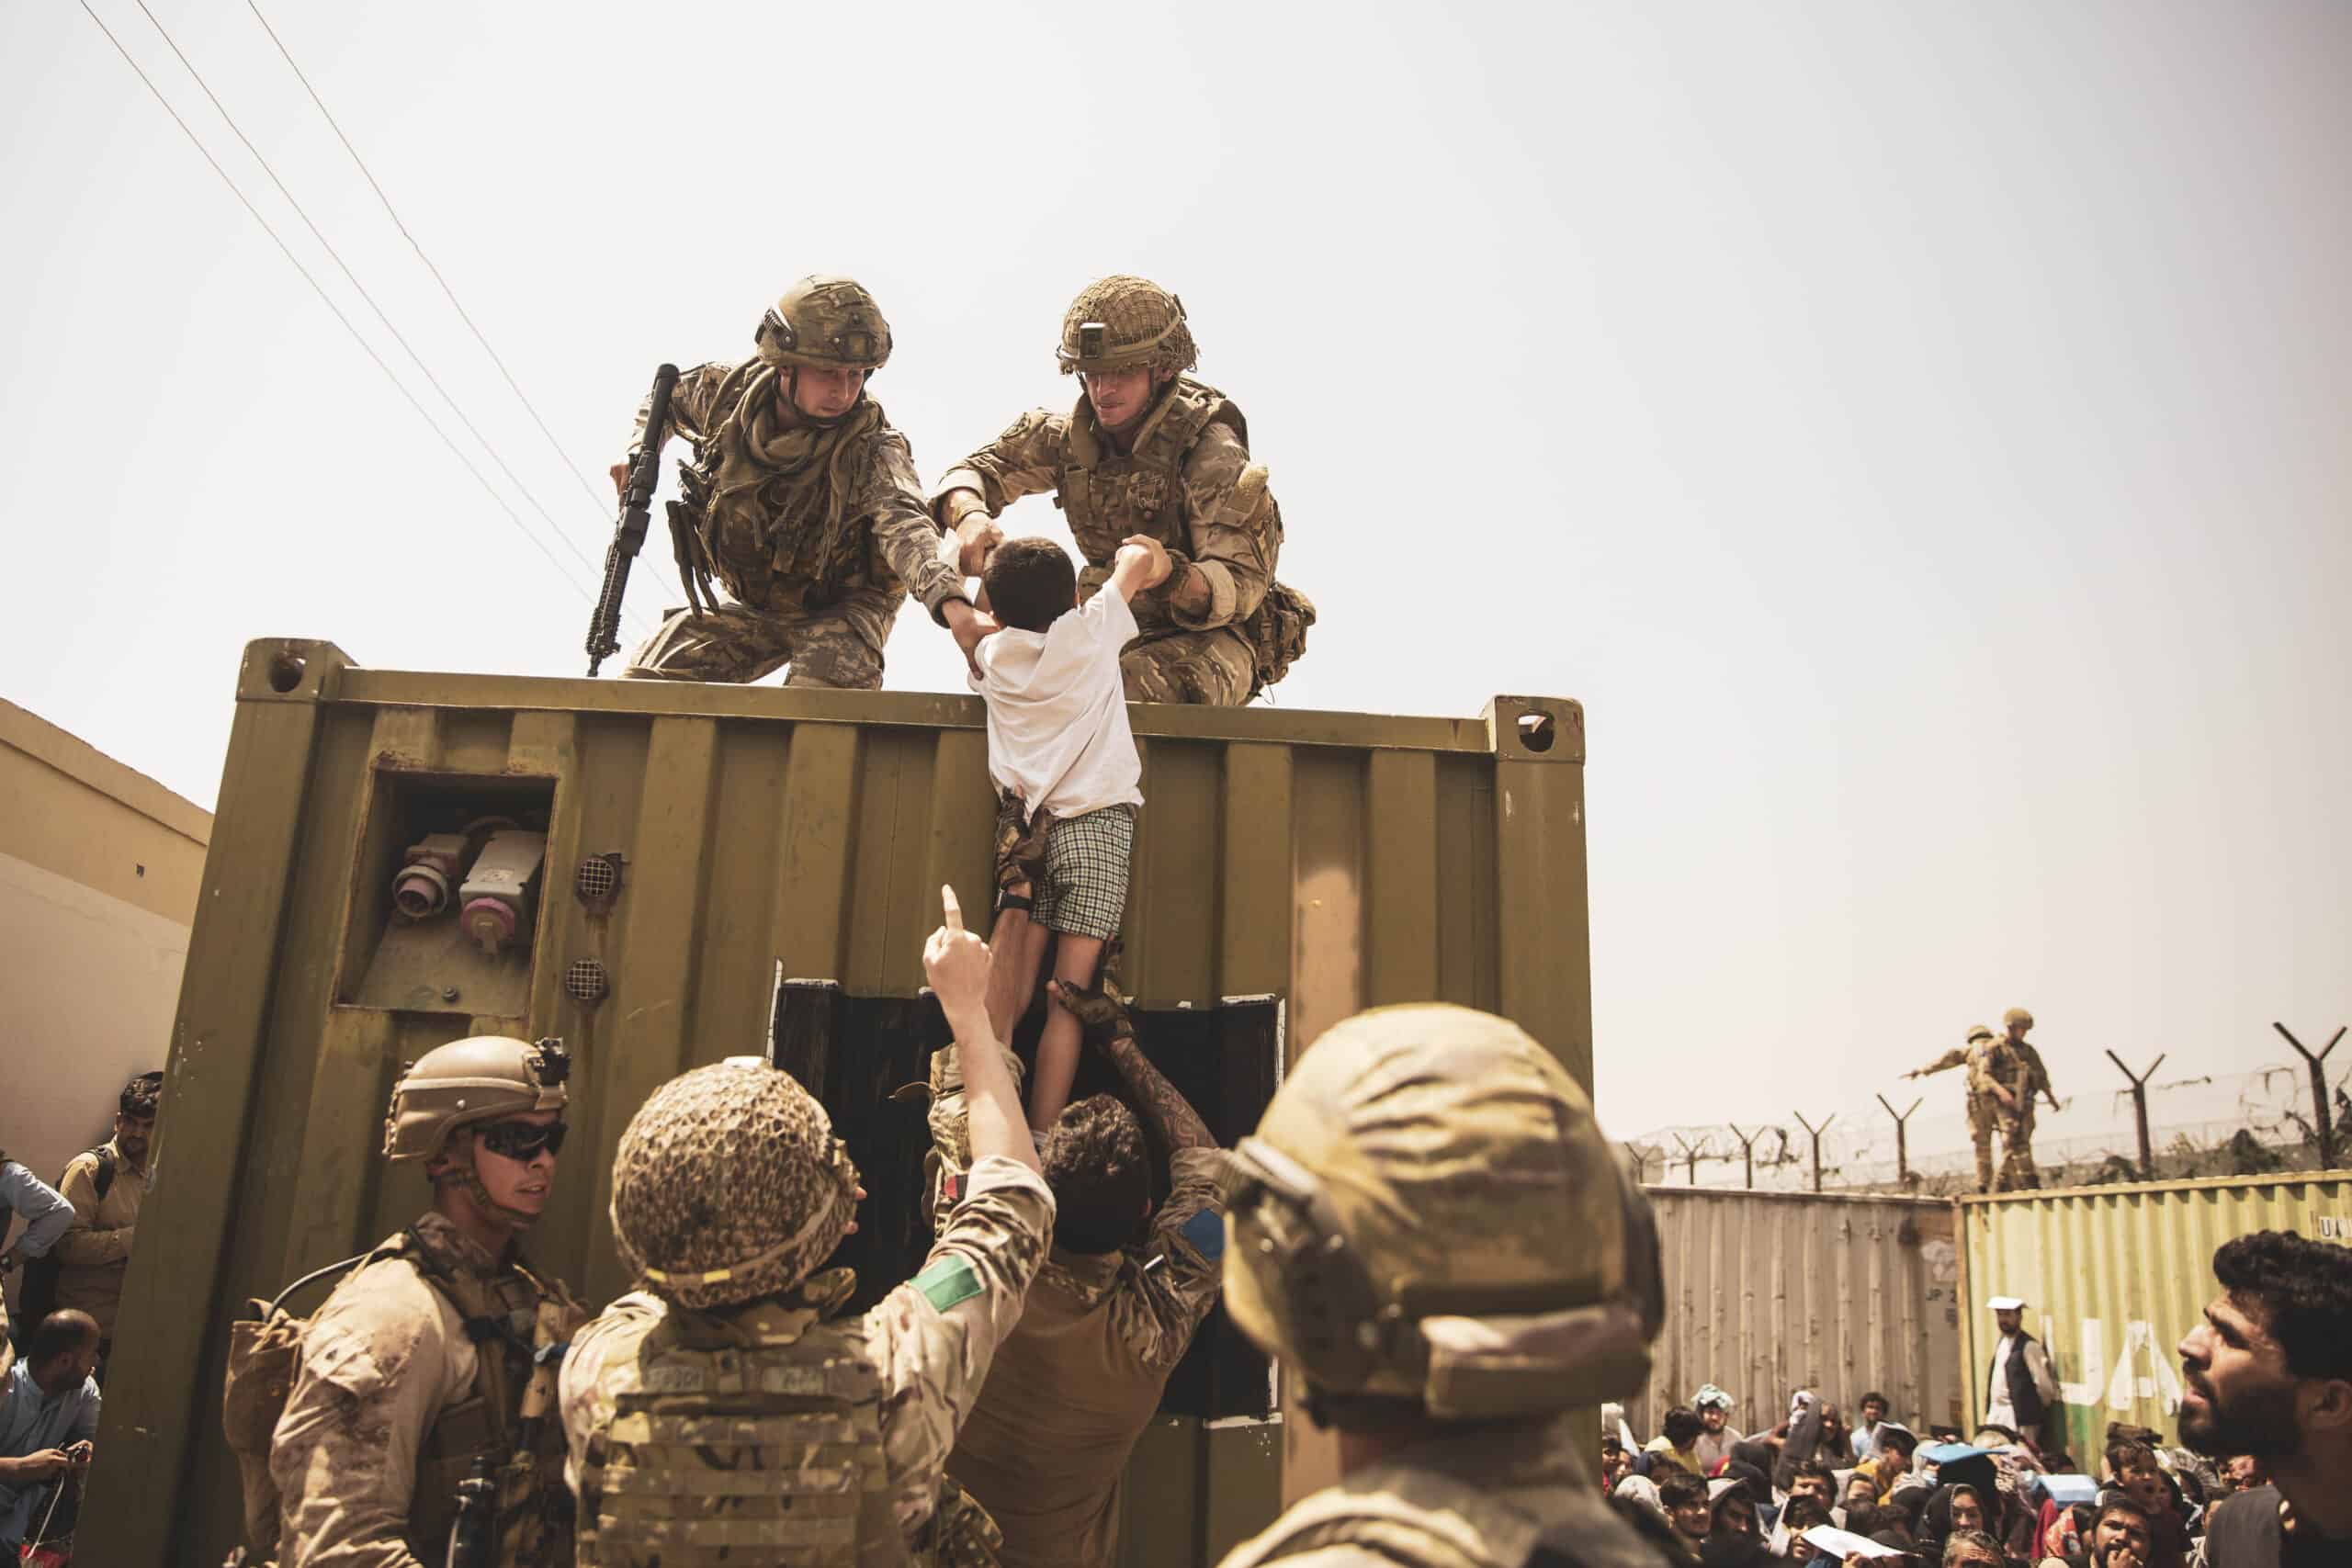 UK coalition forces, Turkish coalition forces, and U.S. Marines assist a child while evacuating Afghanistan